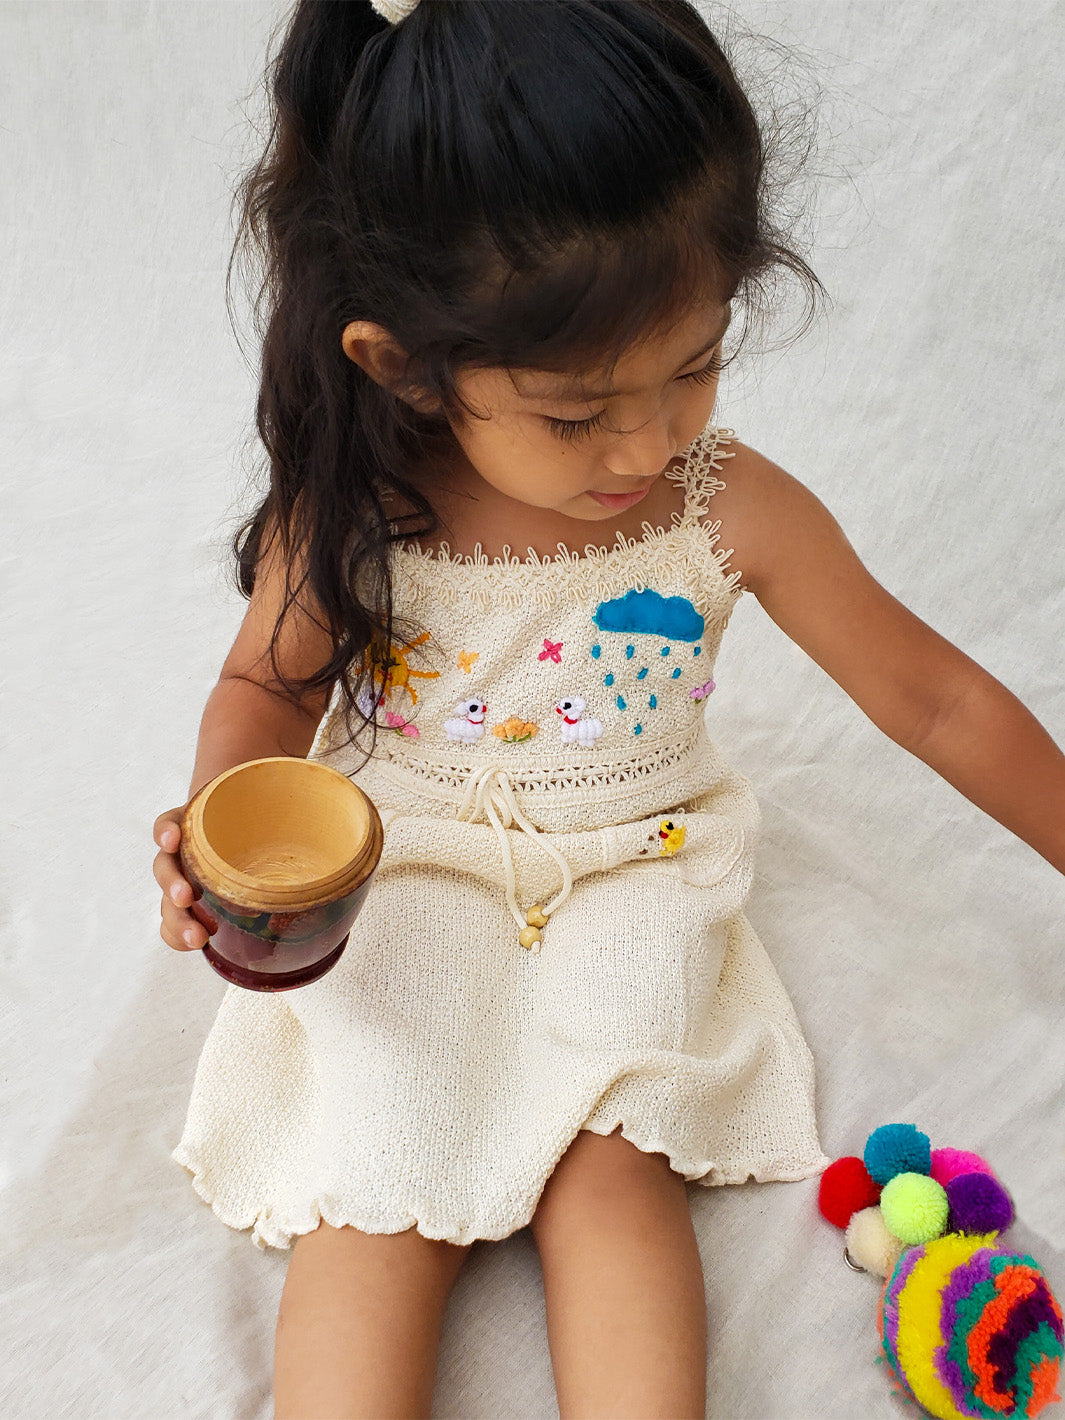 Liten Aventuris Collections. Dress your little star in this Estrella Dress! Featuring a strappy design, two front pockets with intricate cotton knitted lace, and colorful farm animal embroidery, your kiddo will be twinkling bright in no time! With its natural Peruvian Tanguis Cotton and star-inspired name, this dress will make your kids feel like they have the universe in their pocket! Ethically made in Peru. Ekologisk klänning för flickor och bebisar.